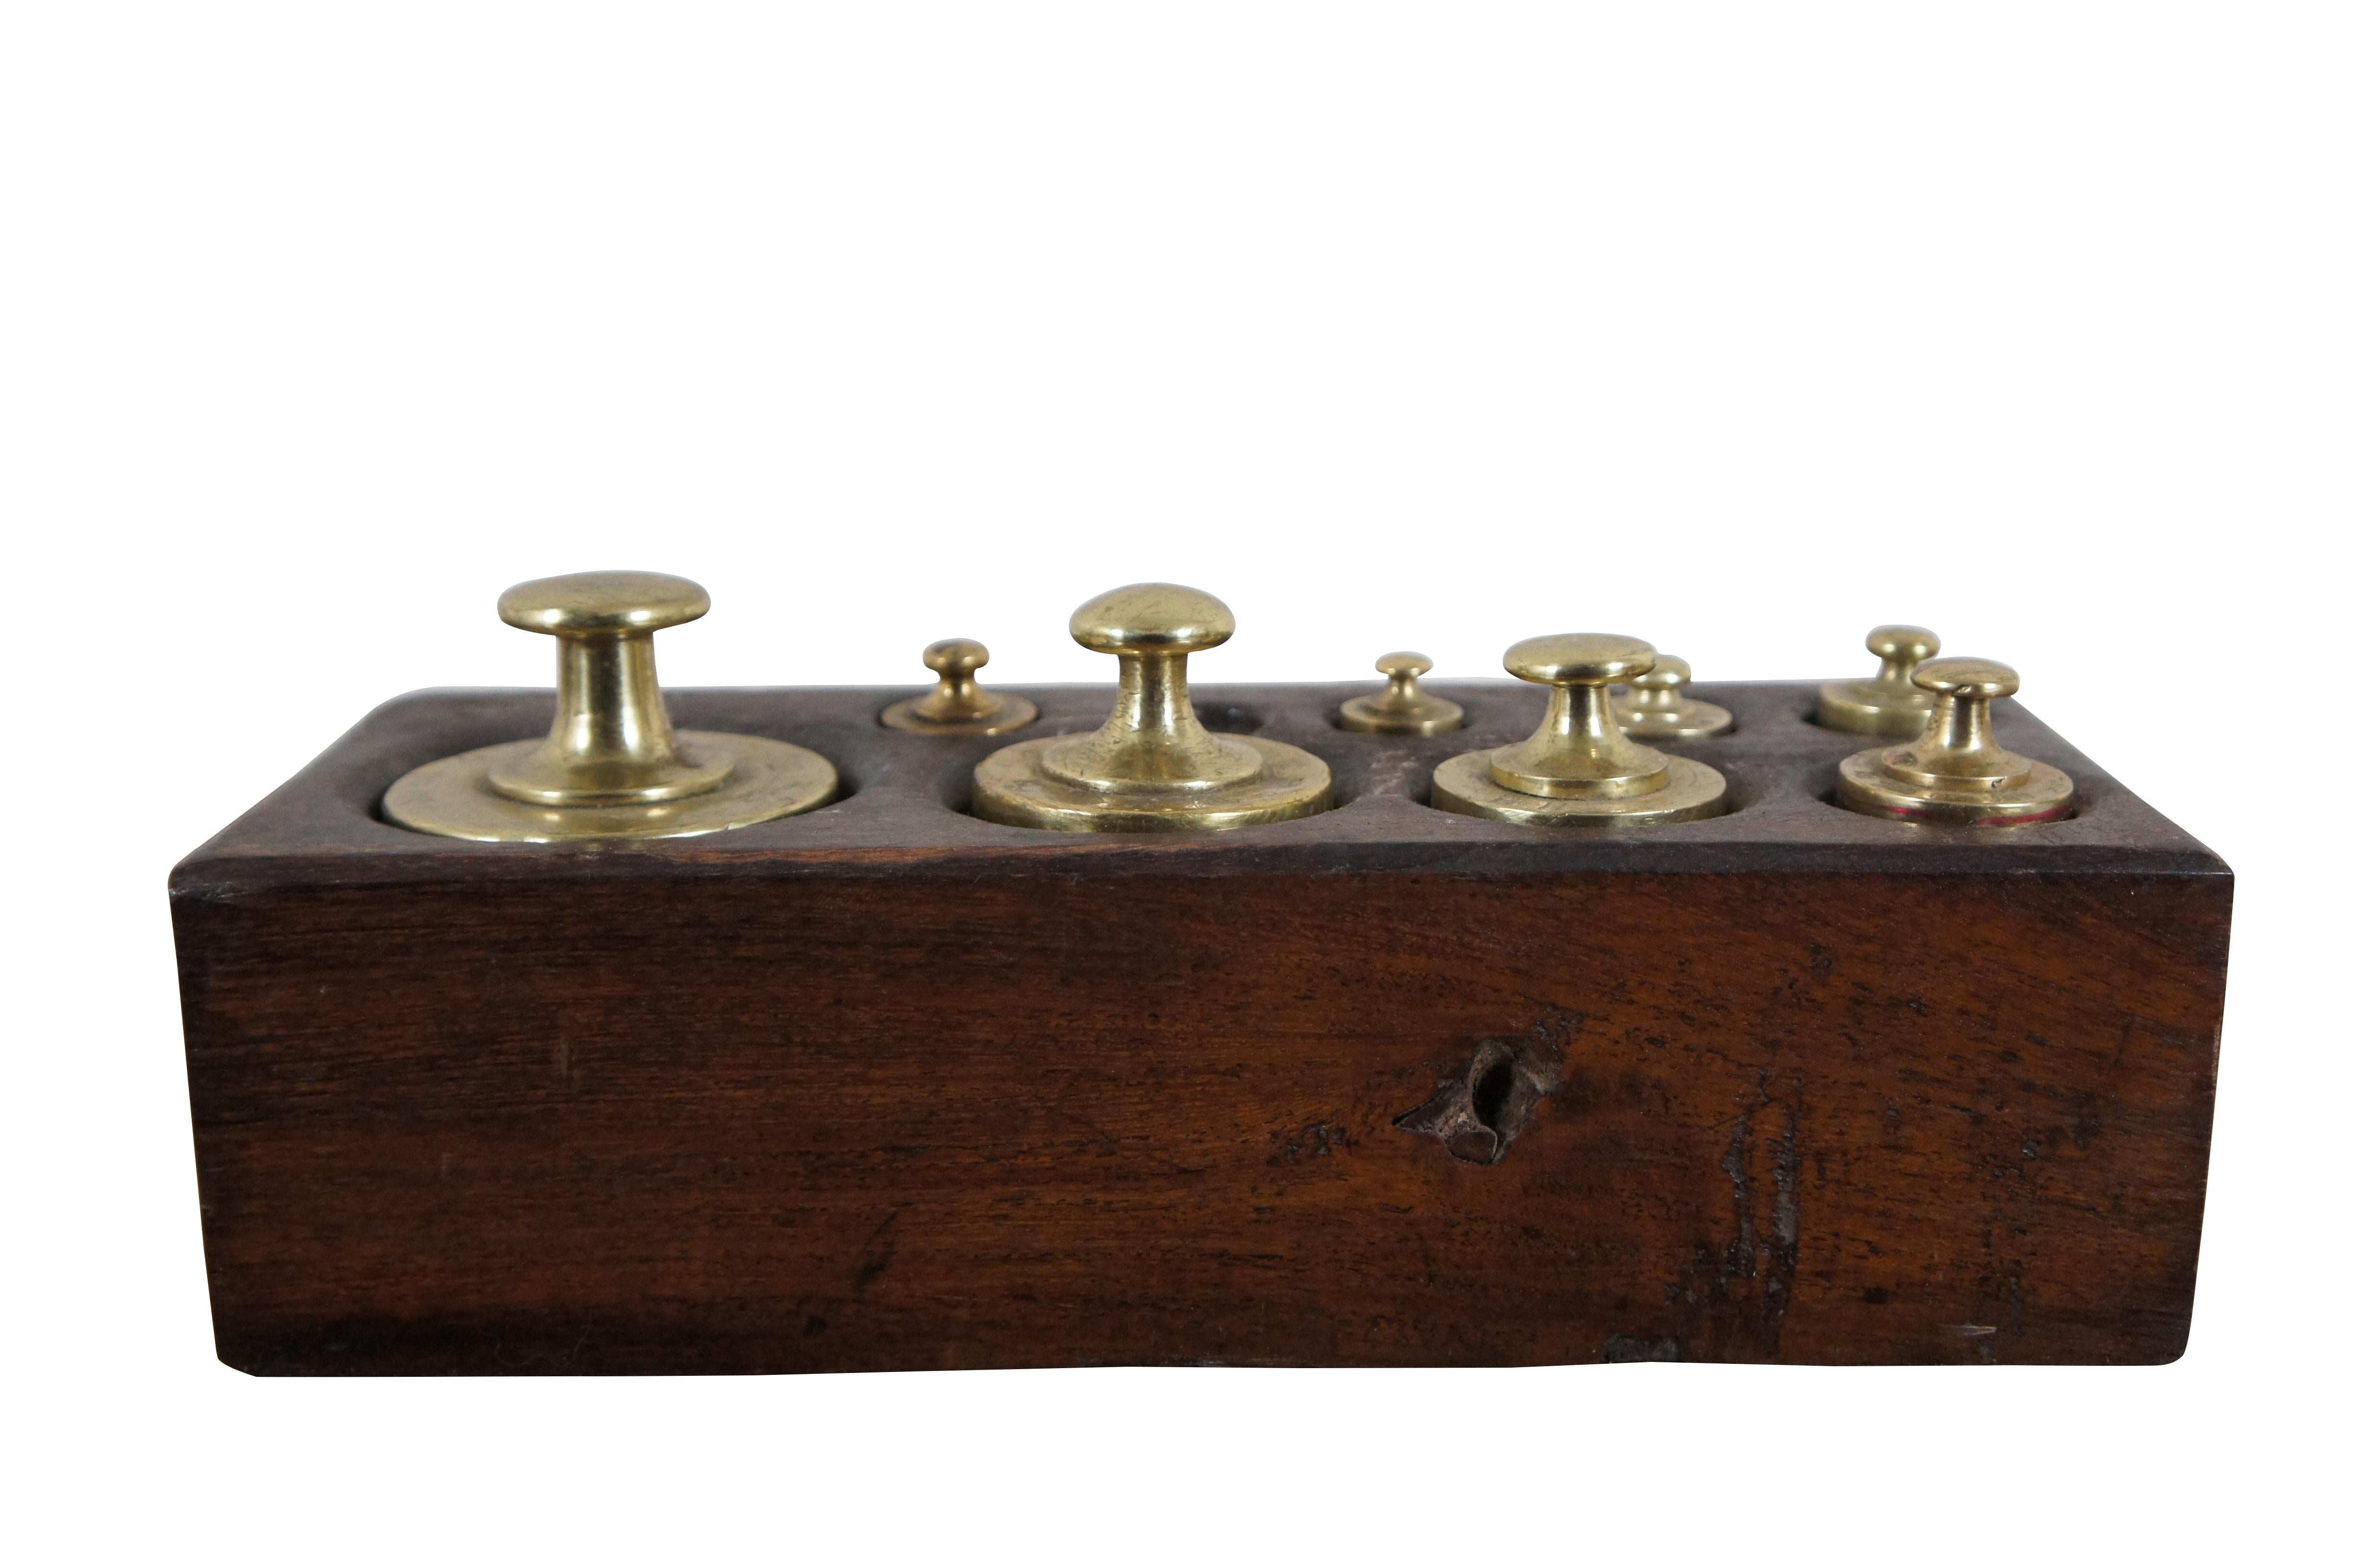 Set of 9 Antique Brass Scale Weights in Wood Block Apothecary 1920s In Good Condition For Sale In Dayton, OH